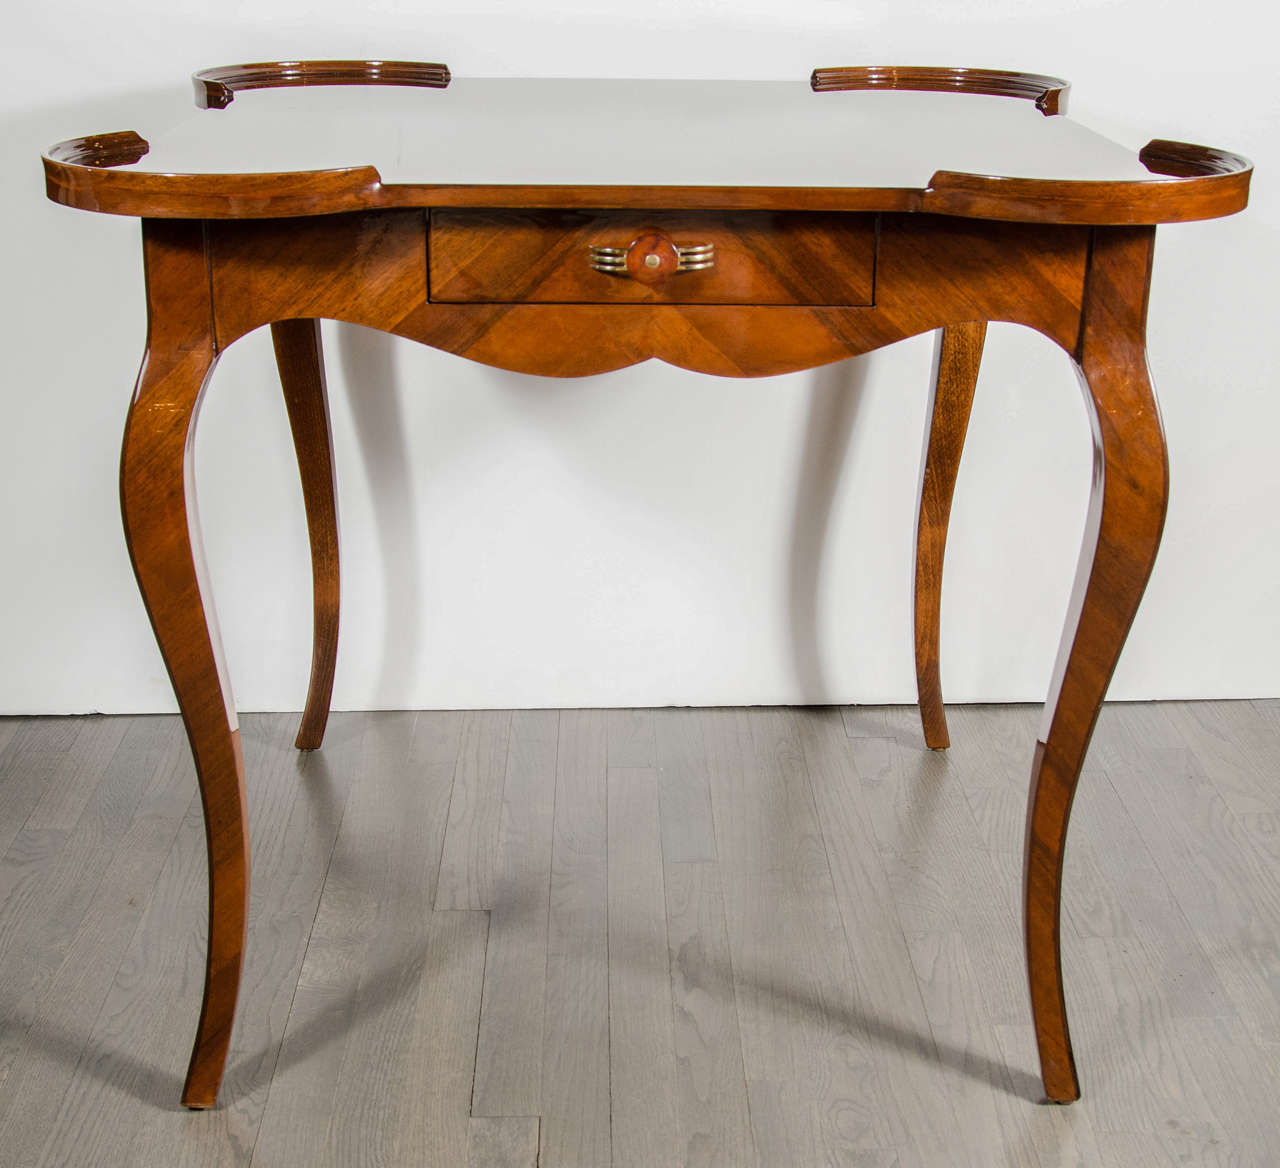 20th Century  French Art Deco Game Table with Inlaid Exotic Burled Walnut Abstract Mosaic Top